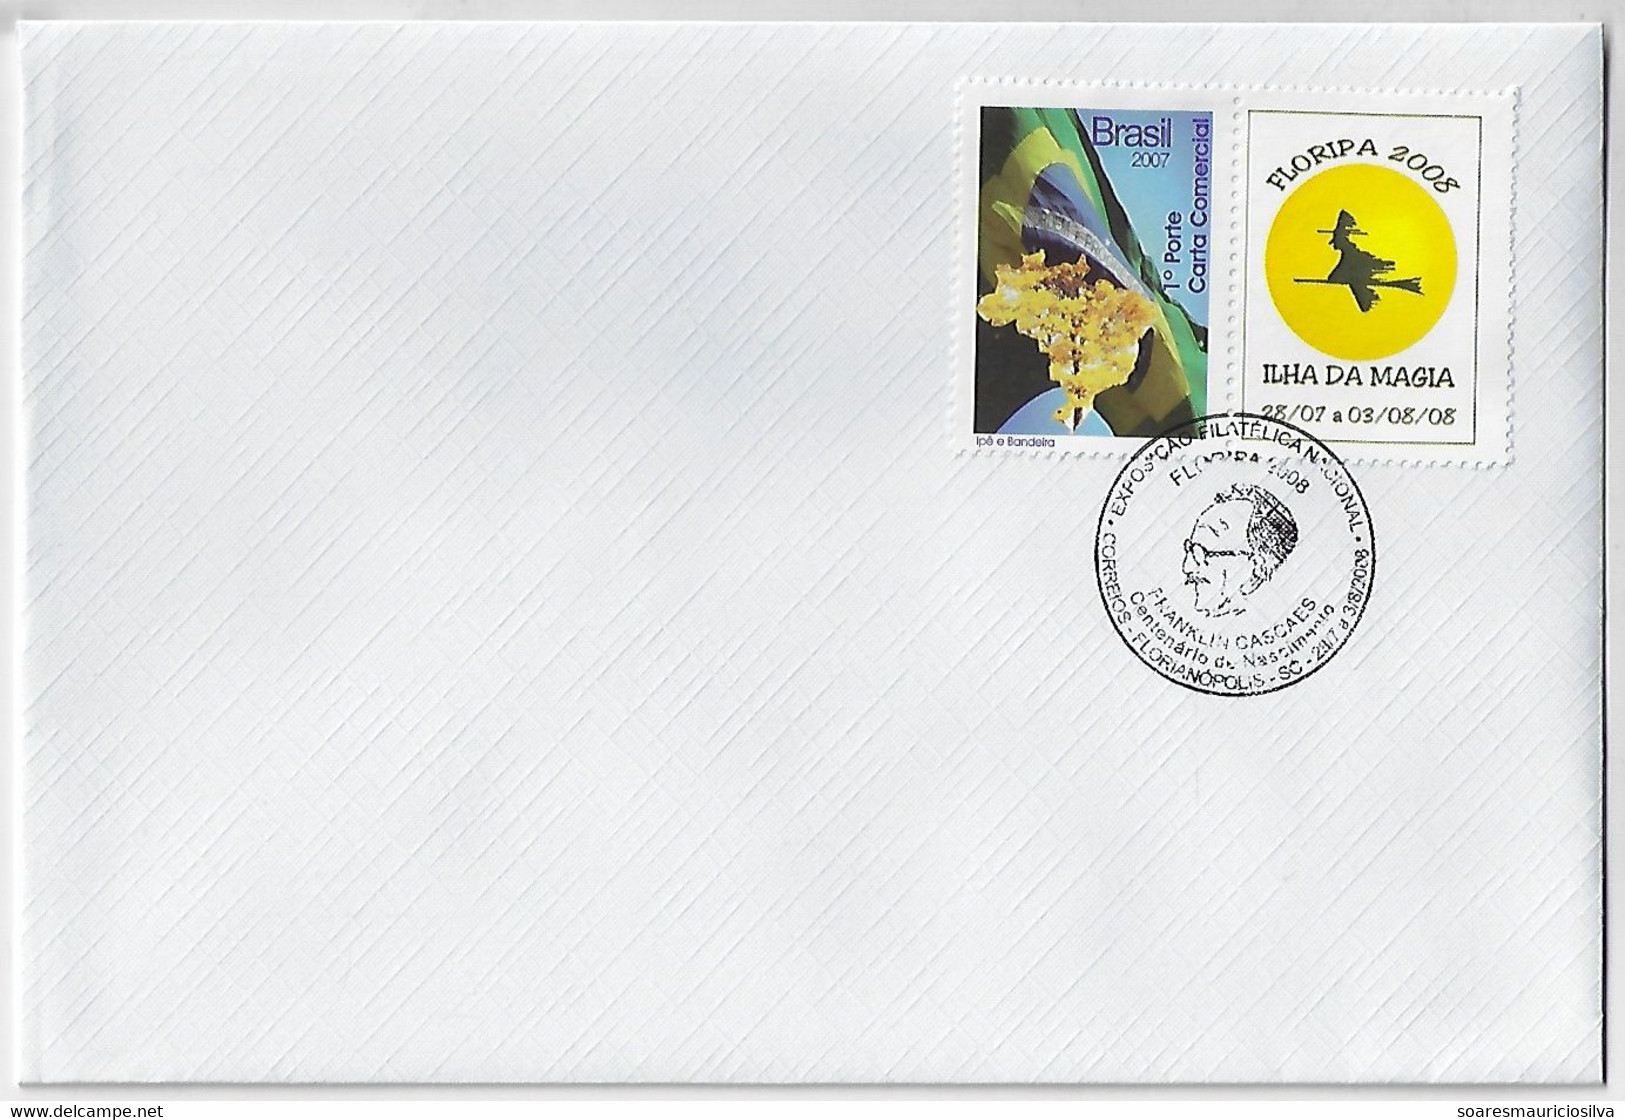 Brazil 2008 Cover Personalized Stamp National Philatelic Exhibition Florianópolis Magic Island Witch In Broom F. Cascaes - Personalized Stamps